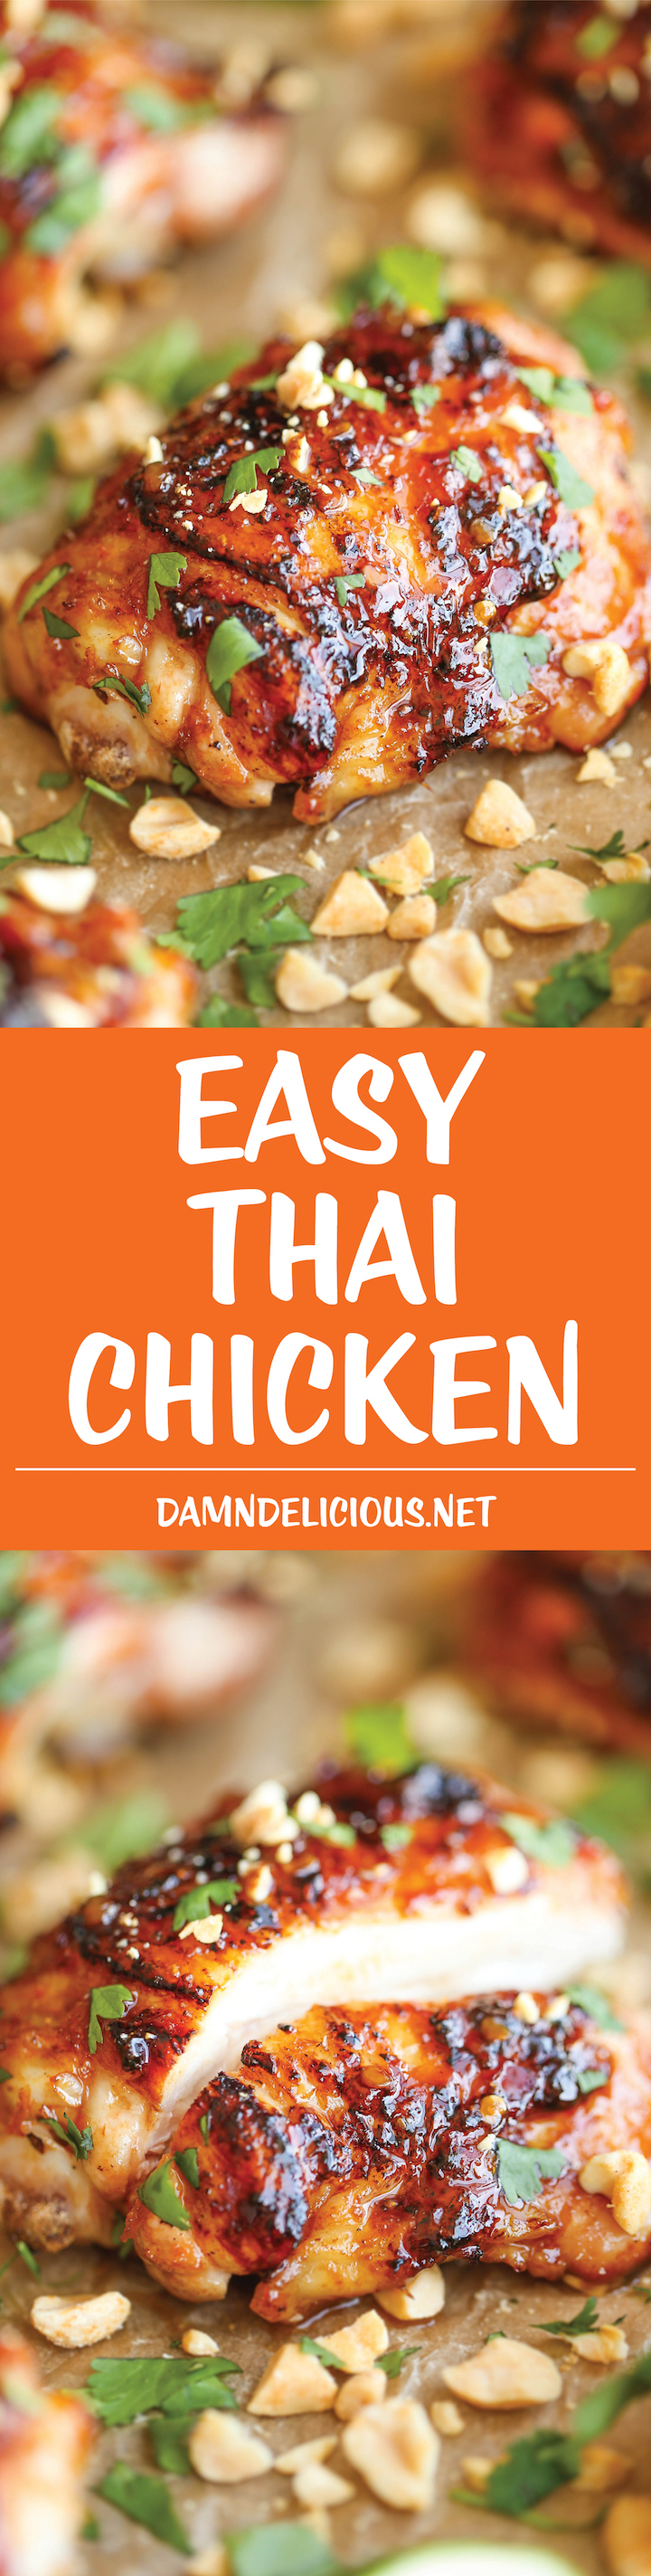 Easy Thai Chicken - So sticky, so tender, so moist and just packed with so much flavor. And it's an easy peasy weeknight meal, made in 30 min or less!